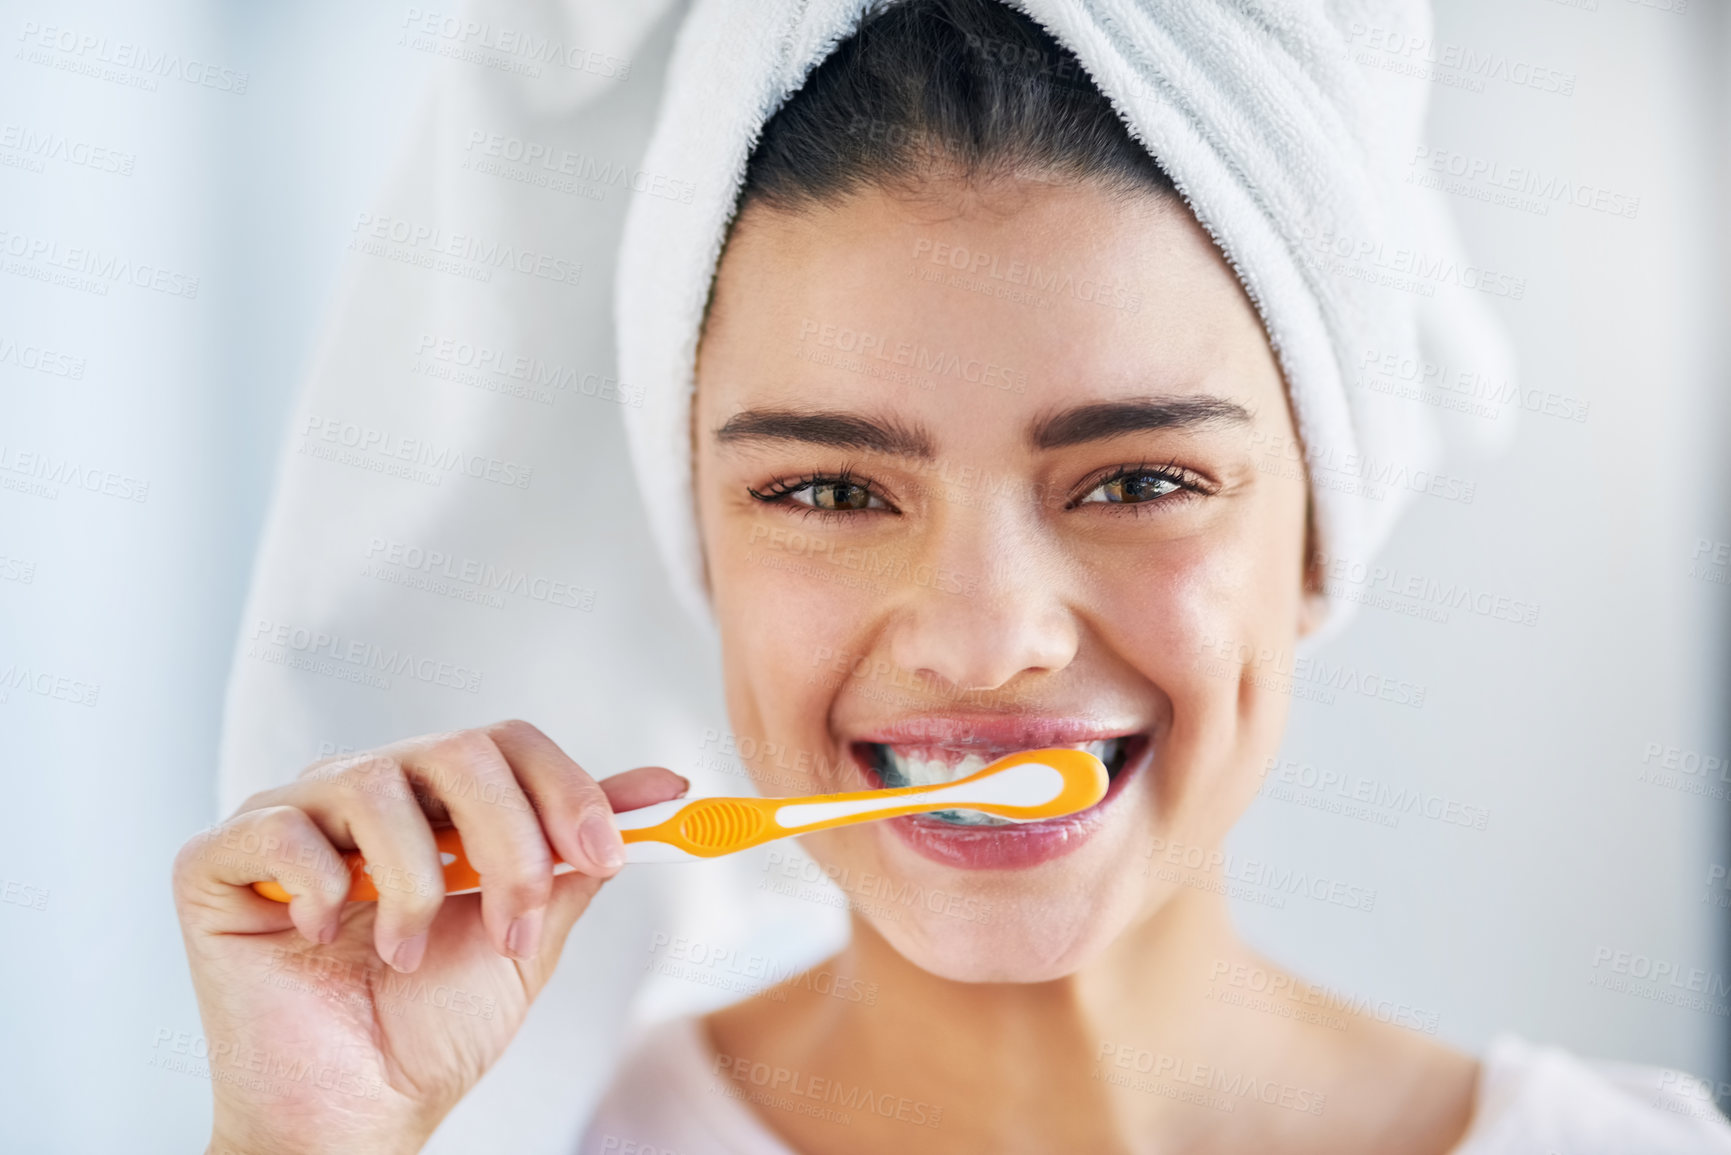 Buy stock photo Portrait of a beautiful young woman brushing her teeth in the bathroom at home